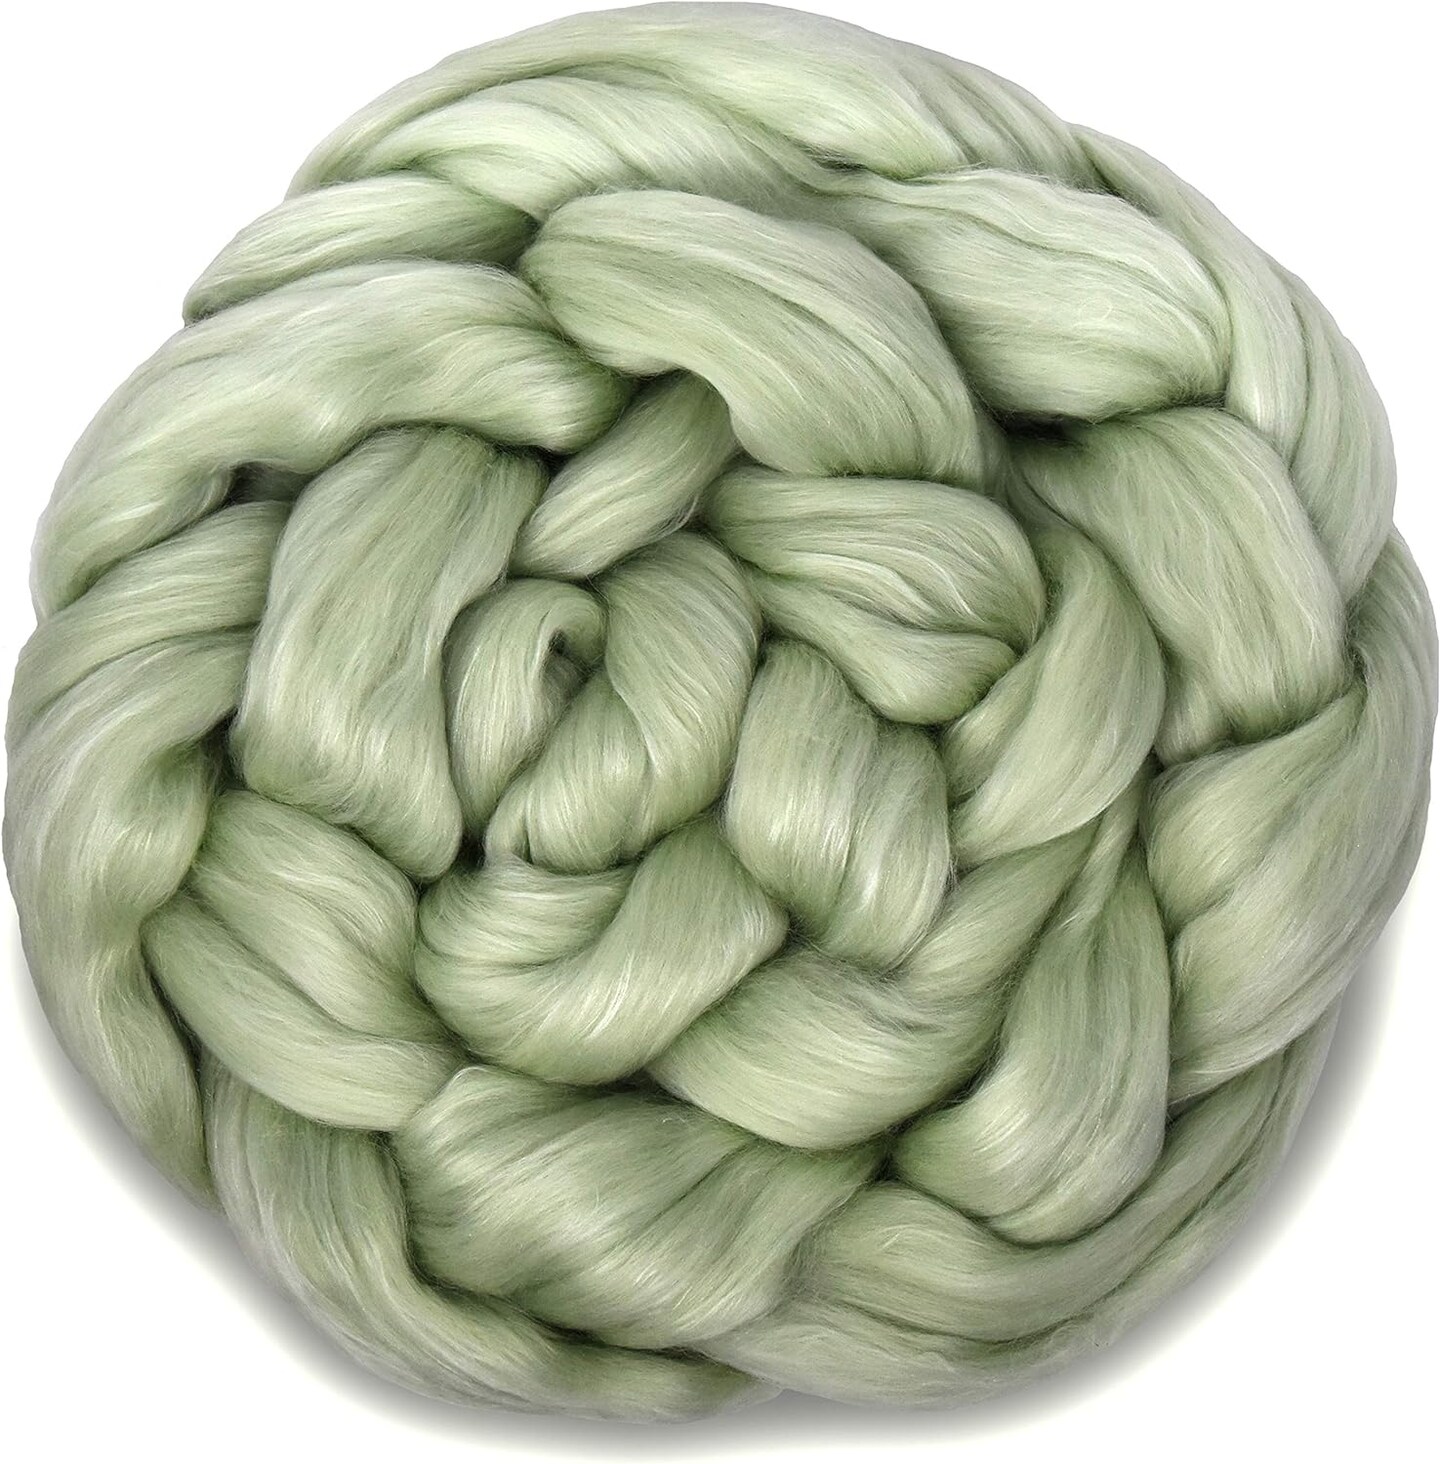 CASHMERE INDULGENCE BLEND of Superfine Merino, Mulberry Silk and a Touch of Cashmere Fiber, Spinning, Felting &#x26; Blending.